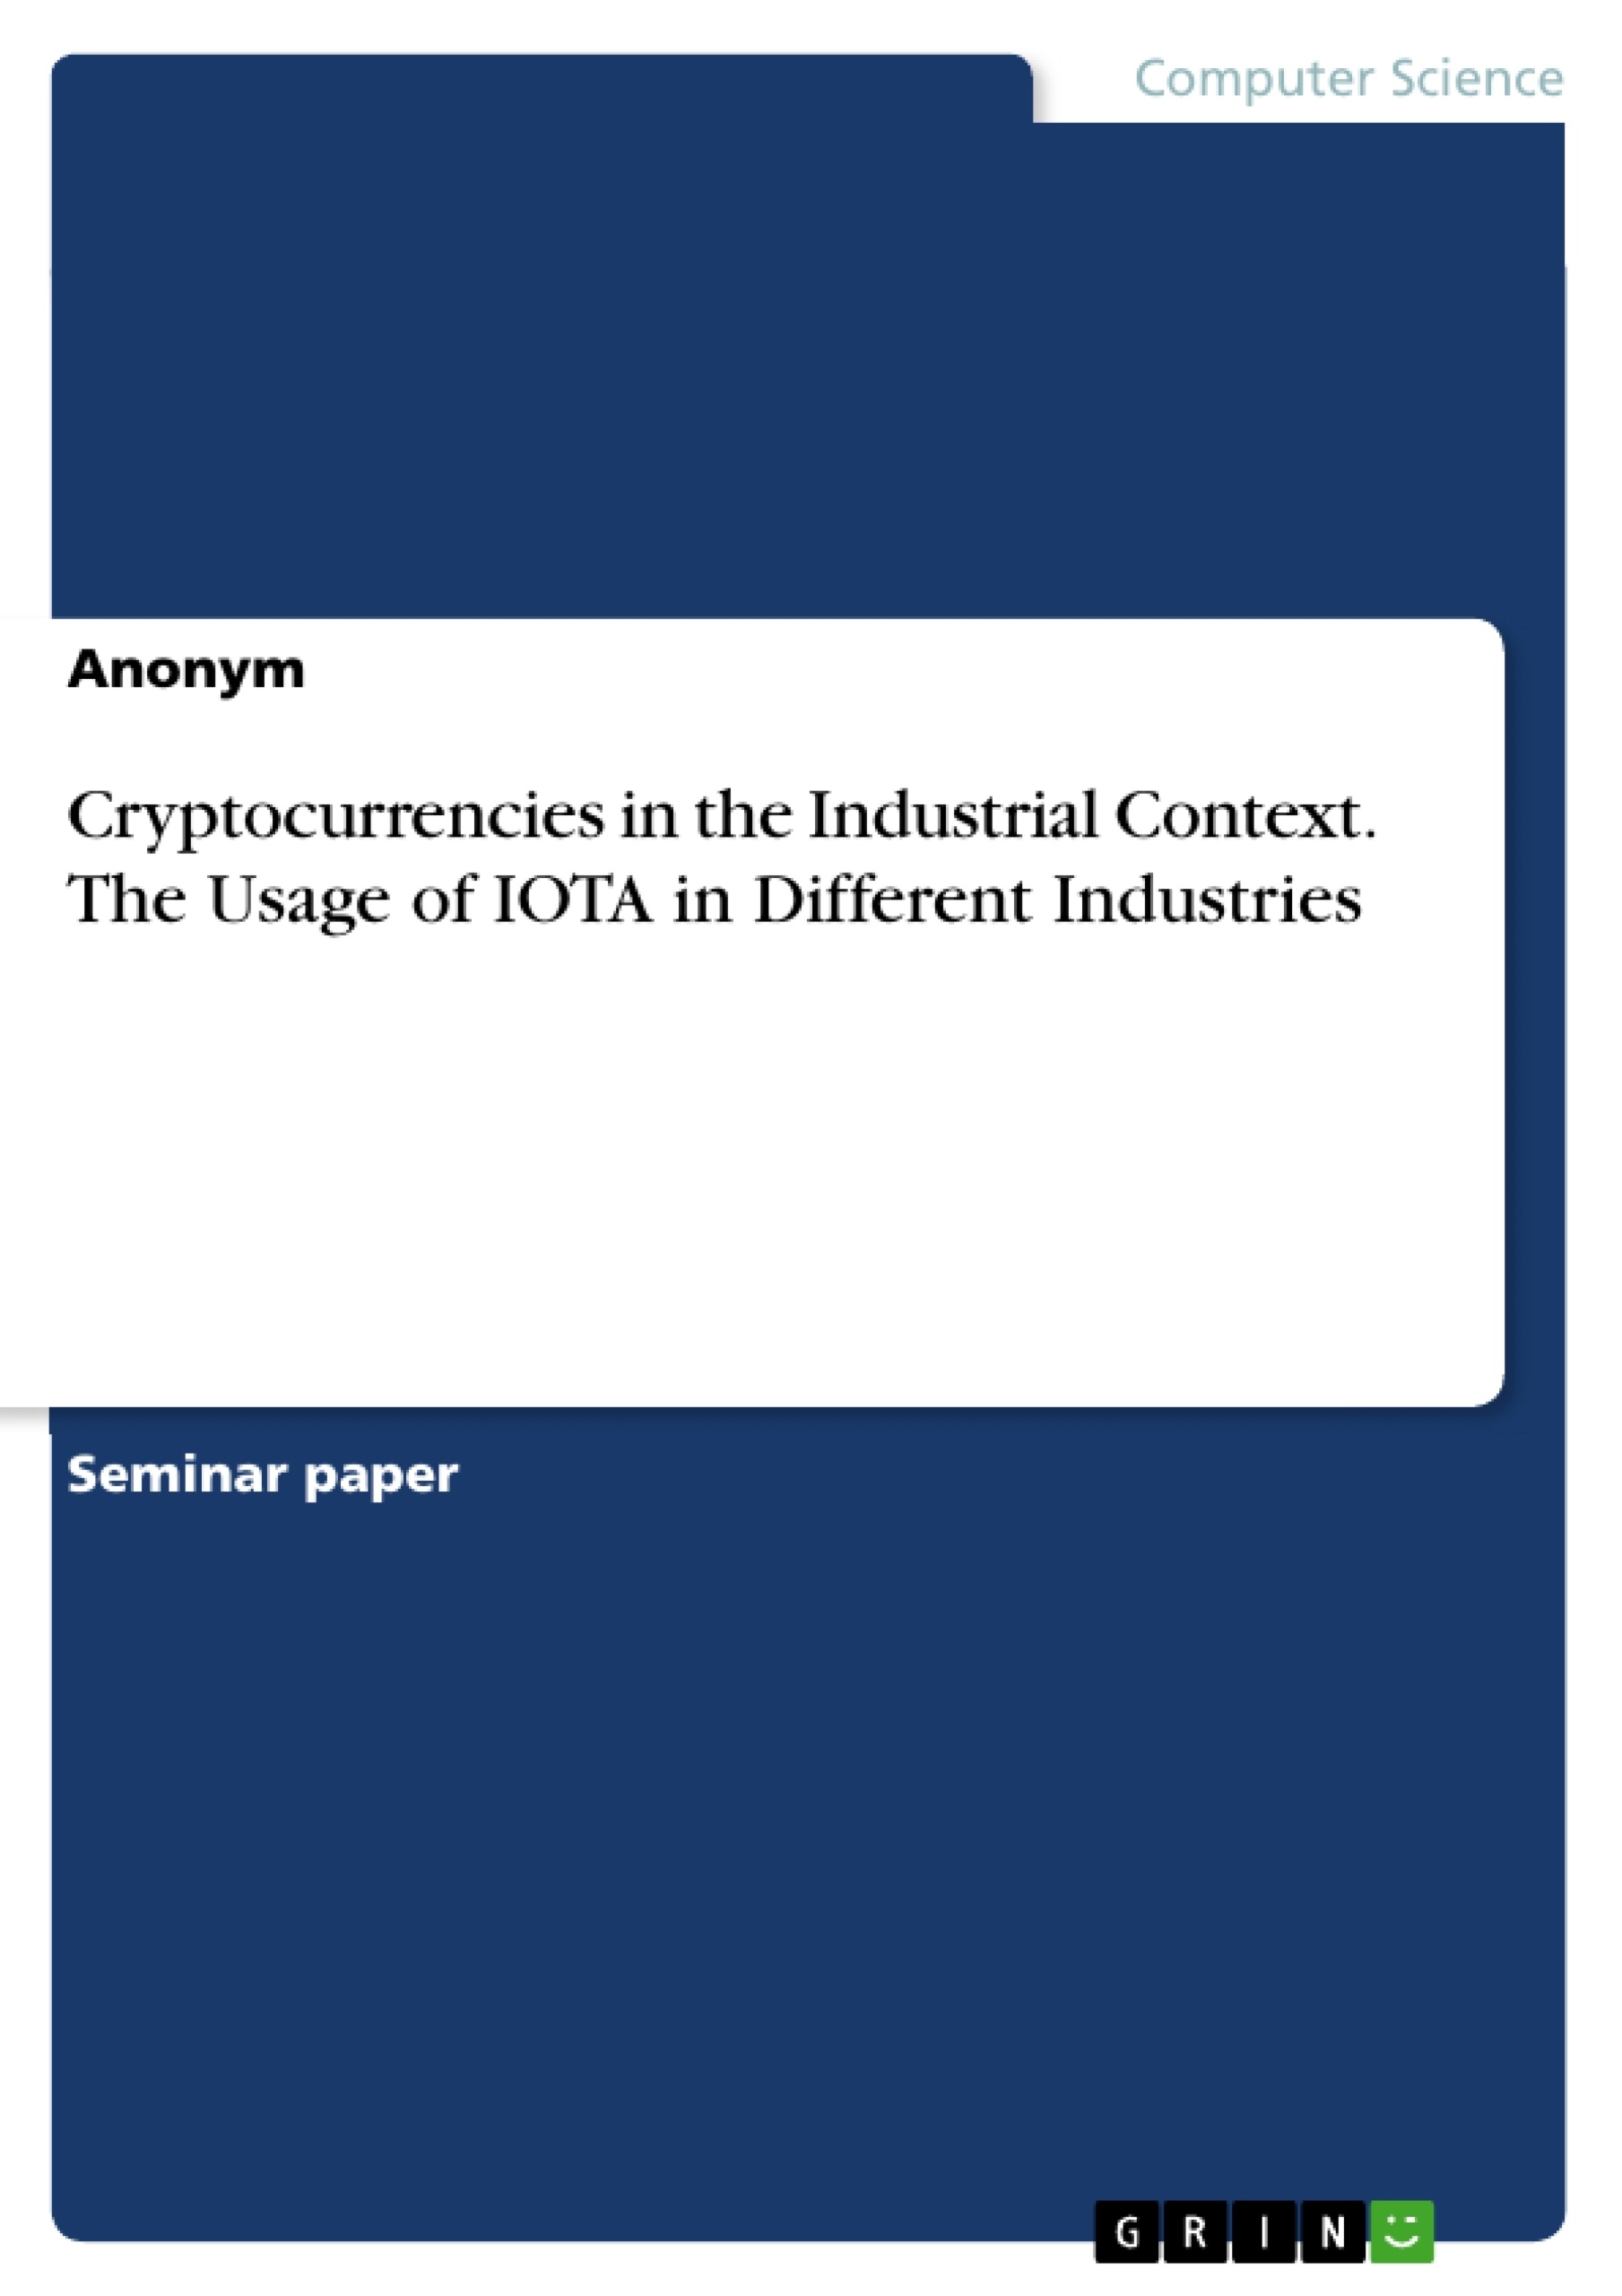 Title: Cryptocurrencies in the Industrial Context. The Usage of IOTA in Different Industries